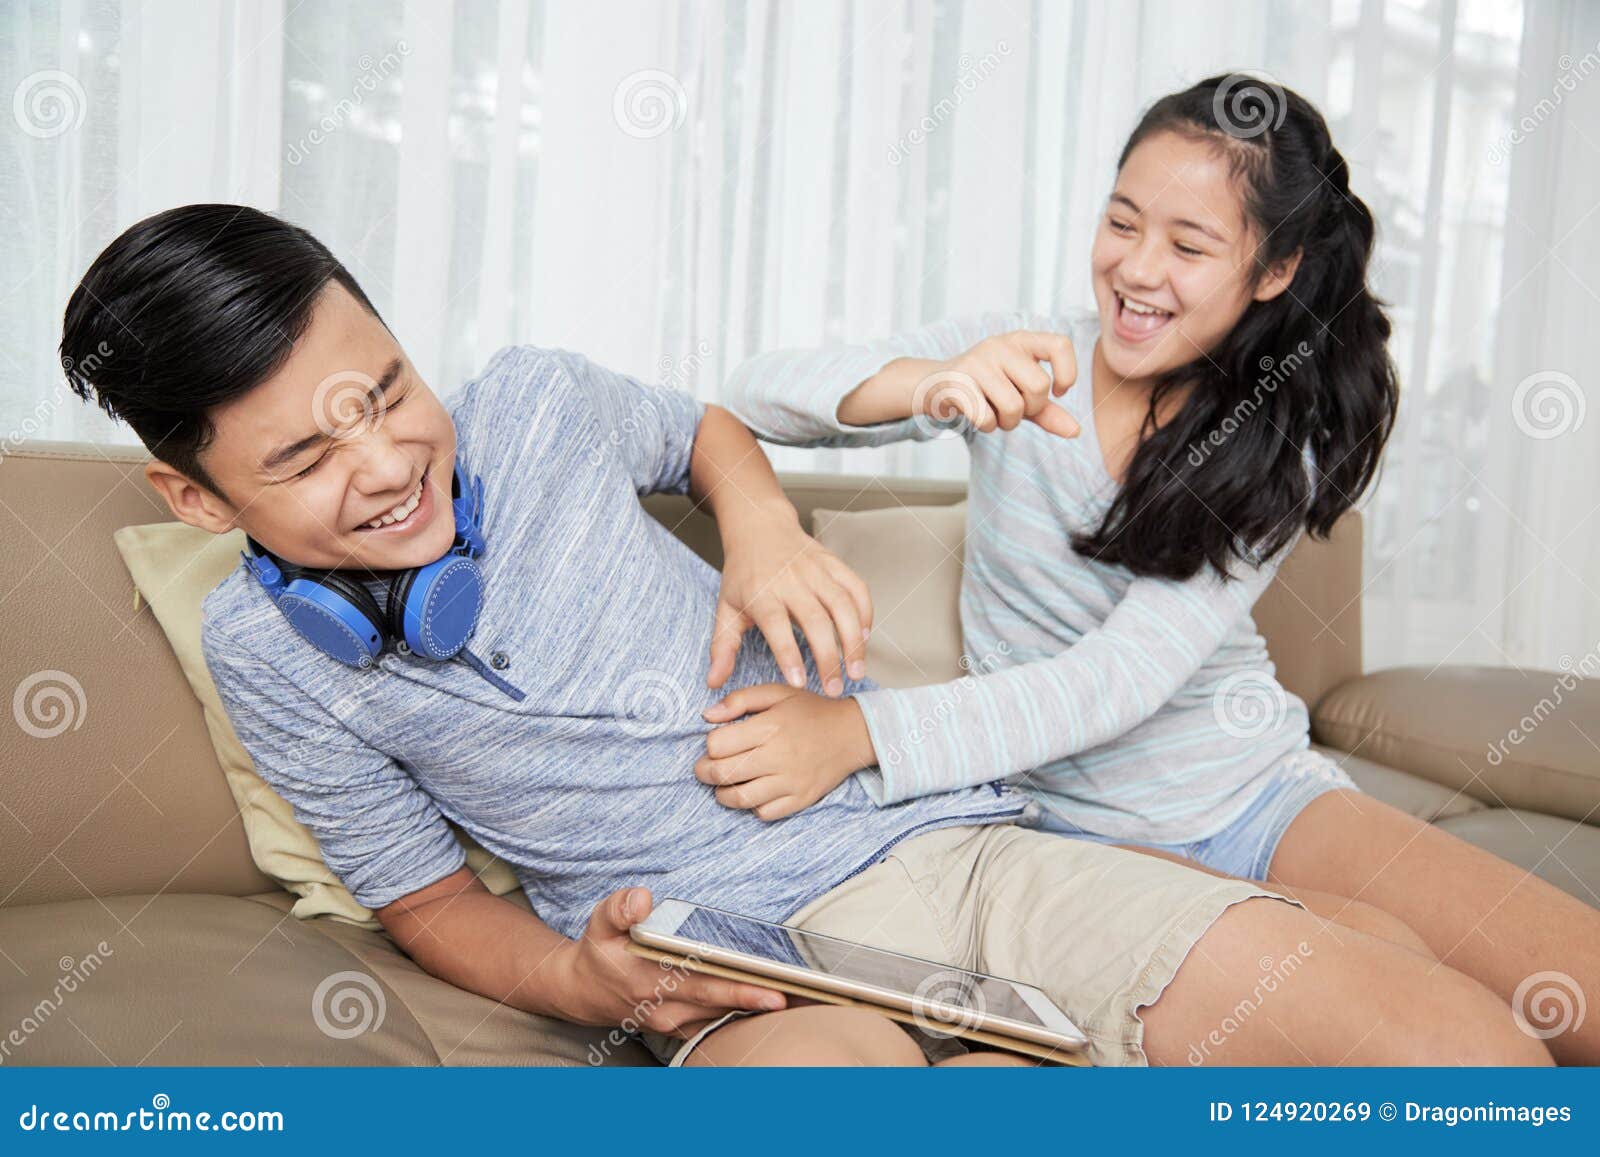 Boy Giving Piggyback Ride To Twin Sister Stock Photo - Image of game,  friend: 233593328